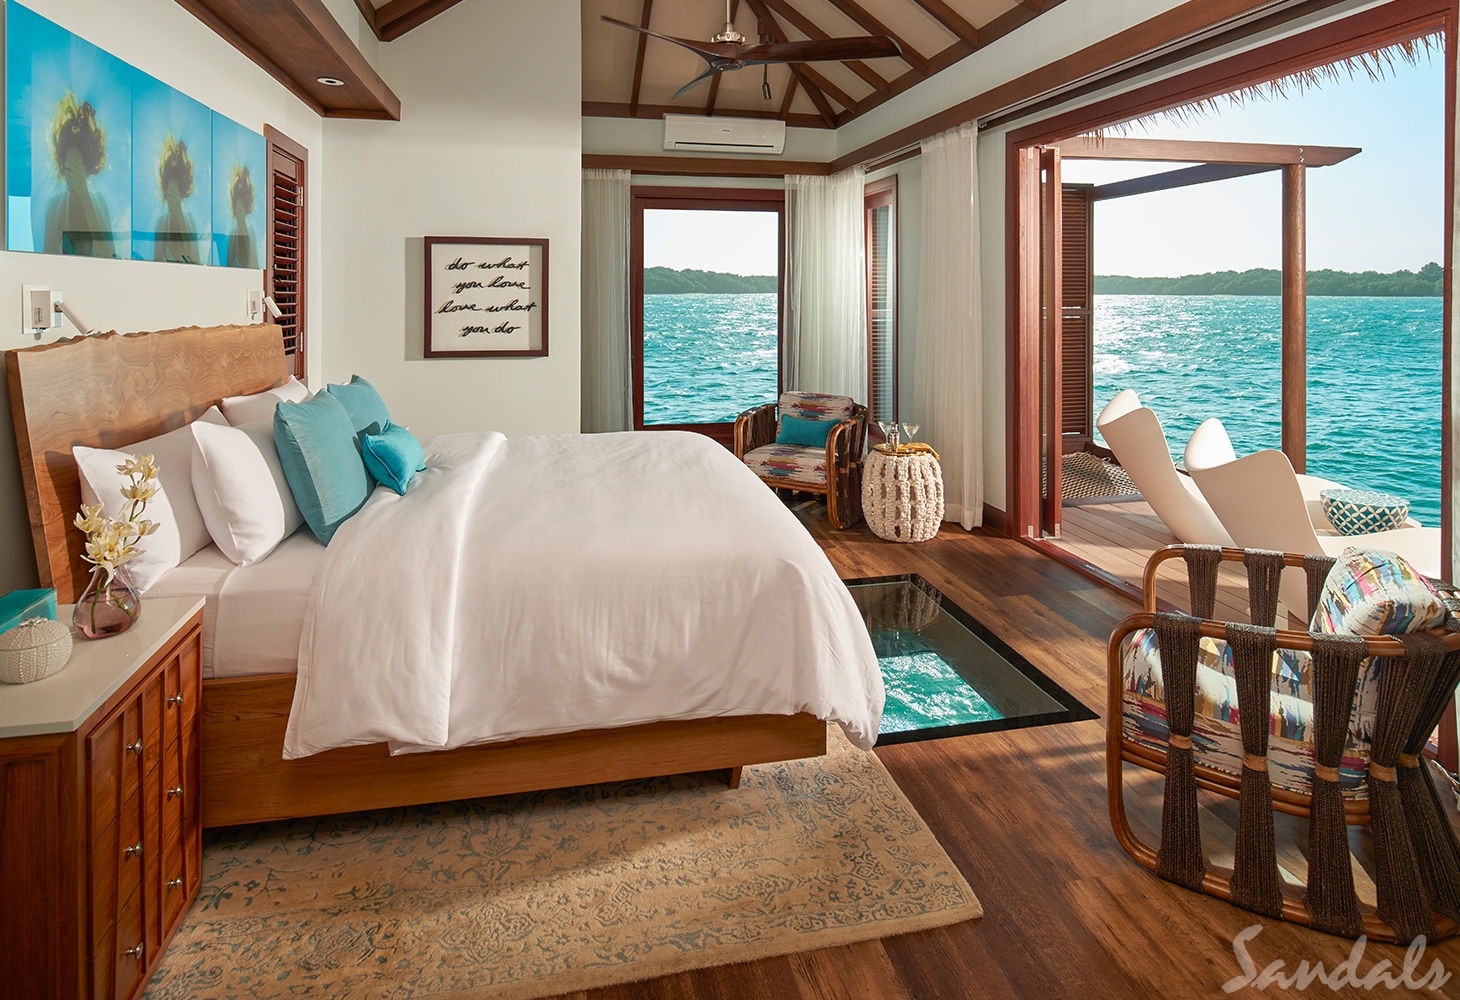 Overwater Bungalows at Sandals from 2 Travel Anywhere | Nashville Bride Guide